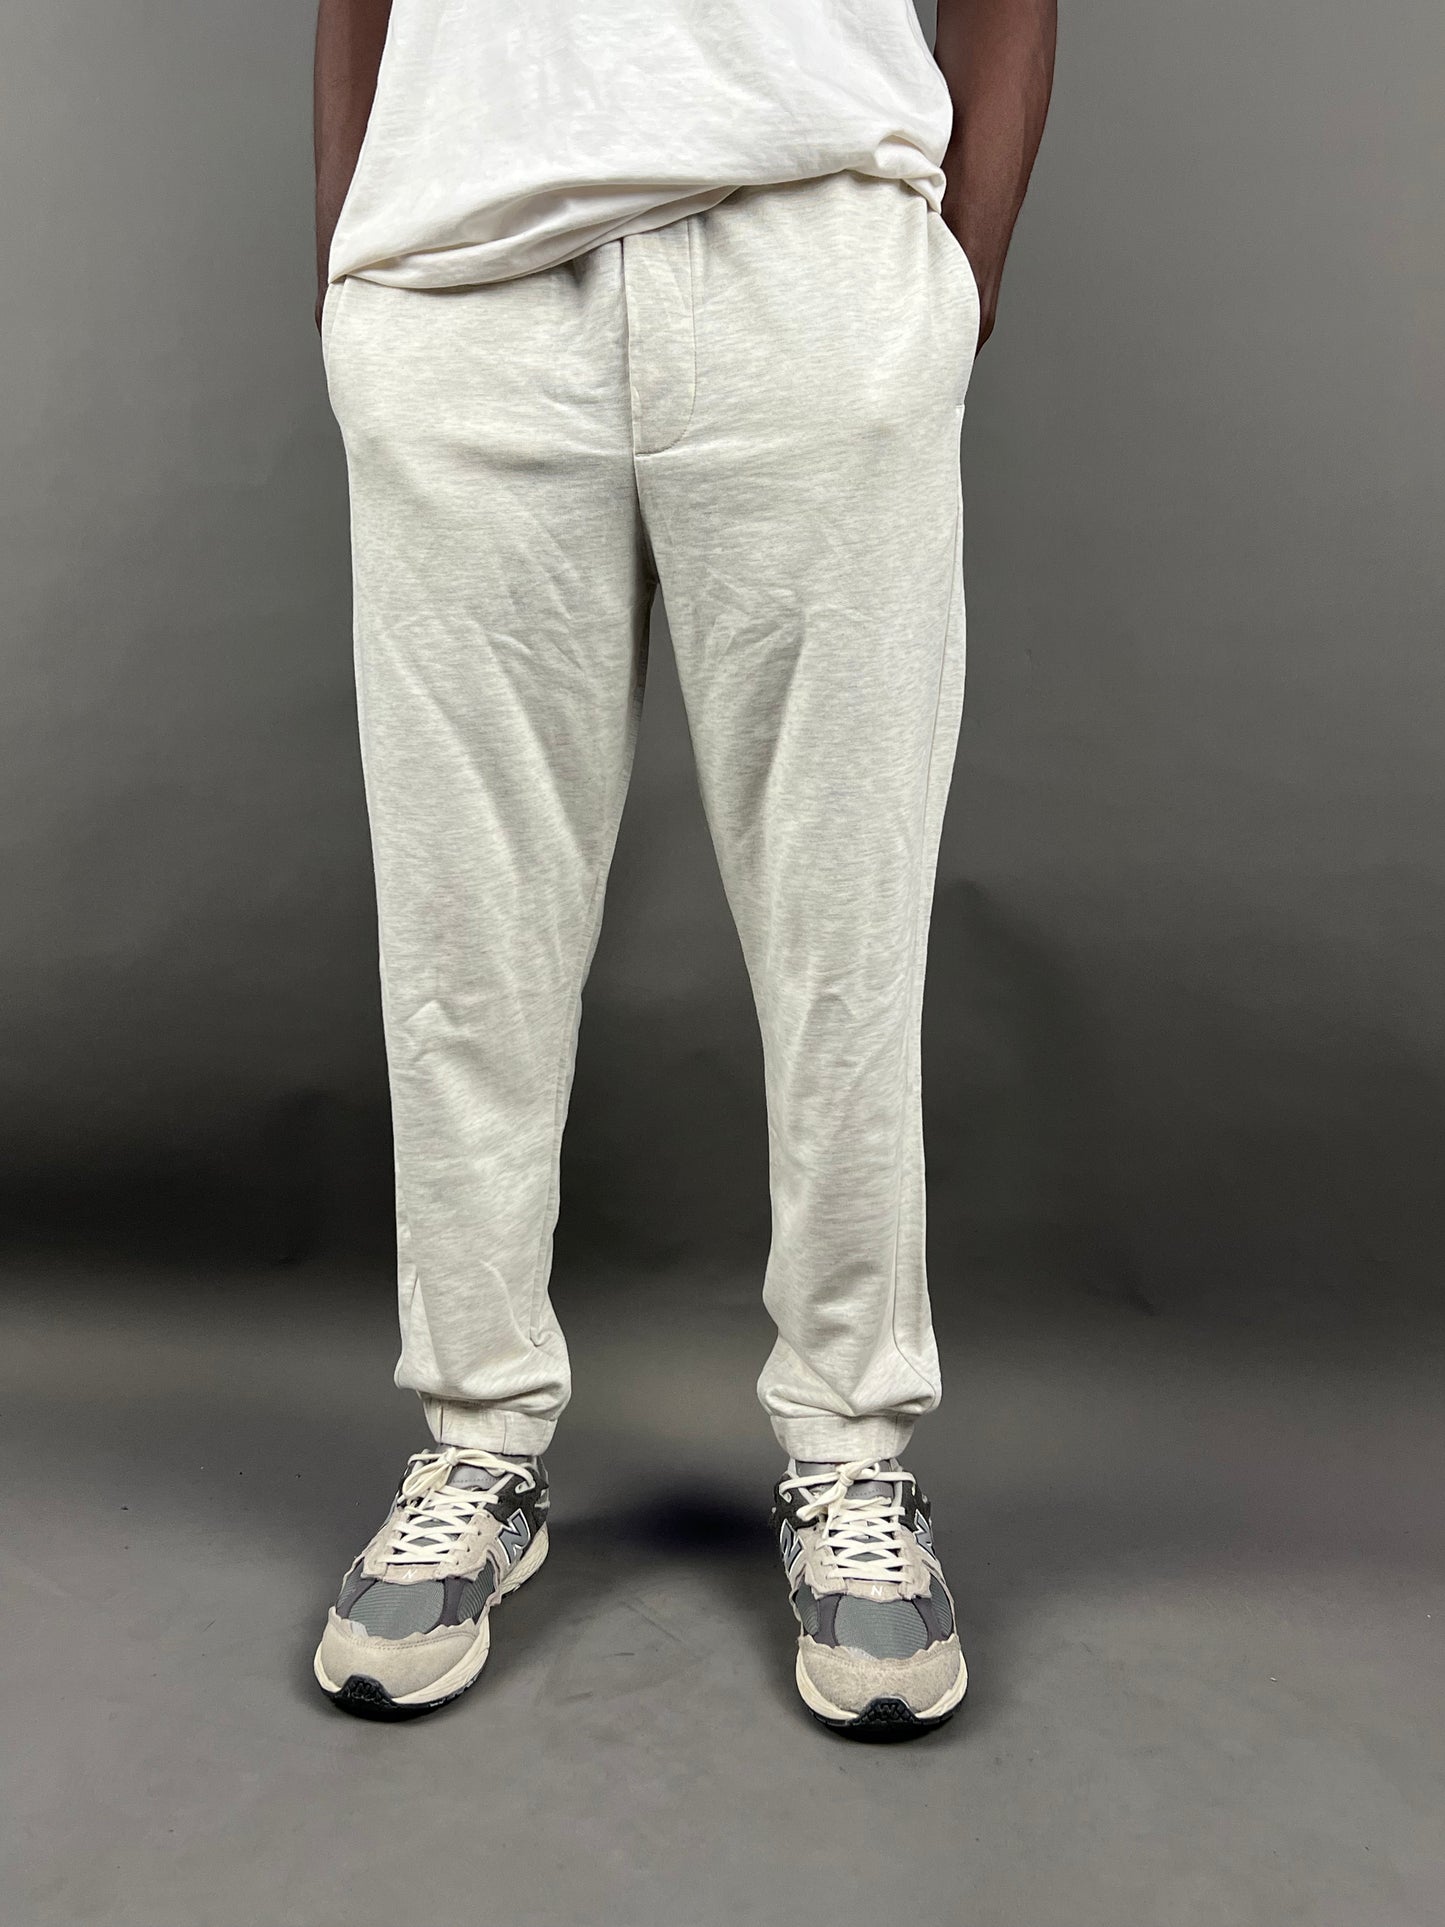 Reserved Jogger pants in marl gray